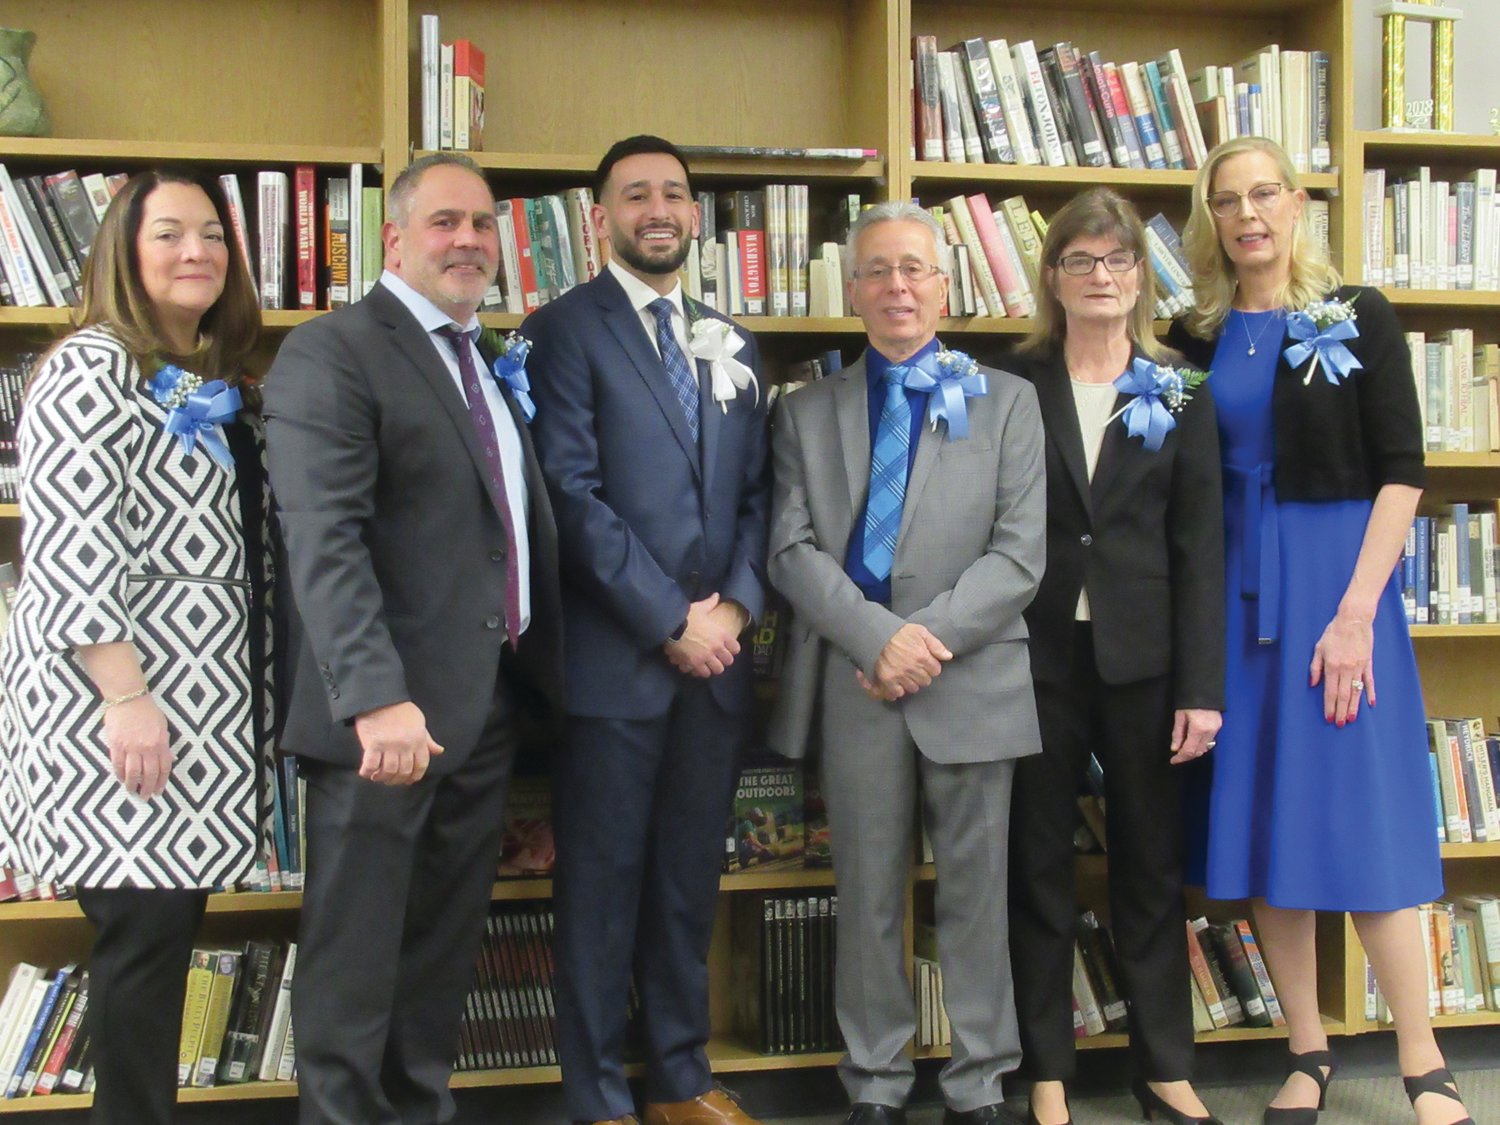 SCHOOL COMMITTEE: The Johnston School Committee helped usher in Mayor Joseph Polisena Jr.’s first term during Monday’s inauguration. The members are Susan Mansolillo, Vice Chairman Joseph Rotella, Chairman Robert LaFazia, and Marysue Andreozzi.